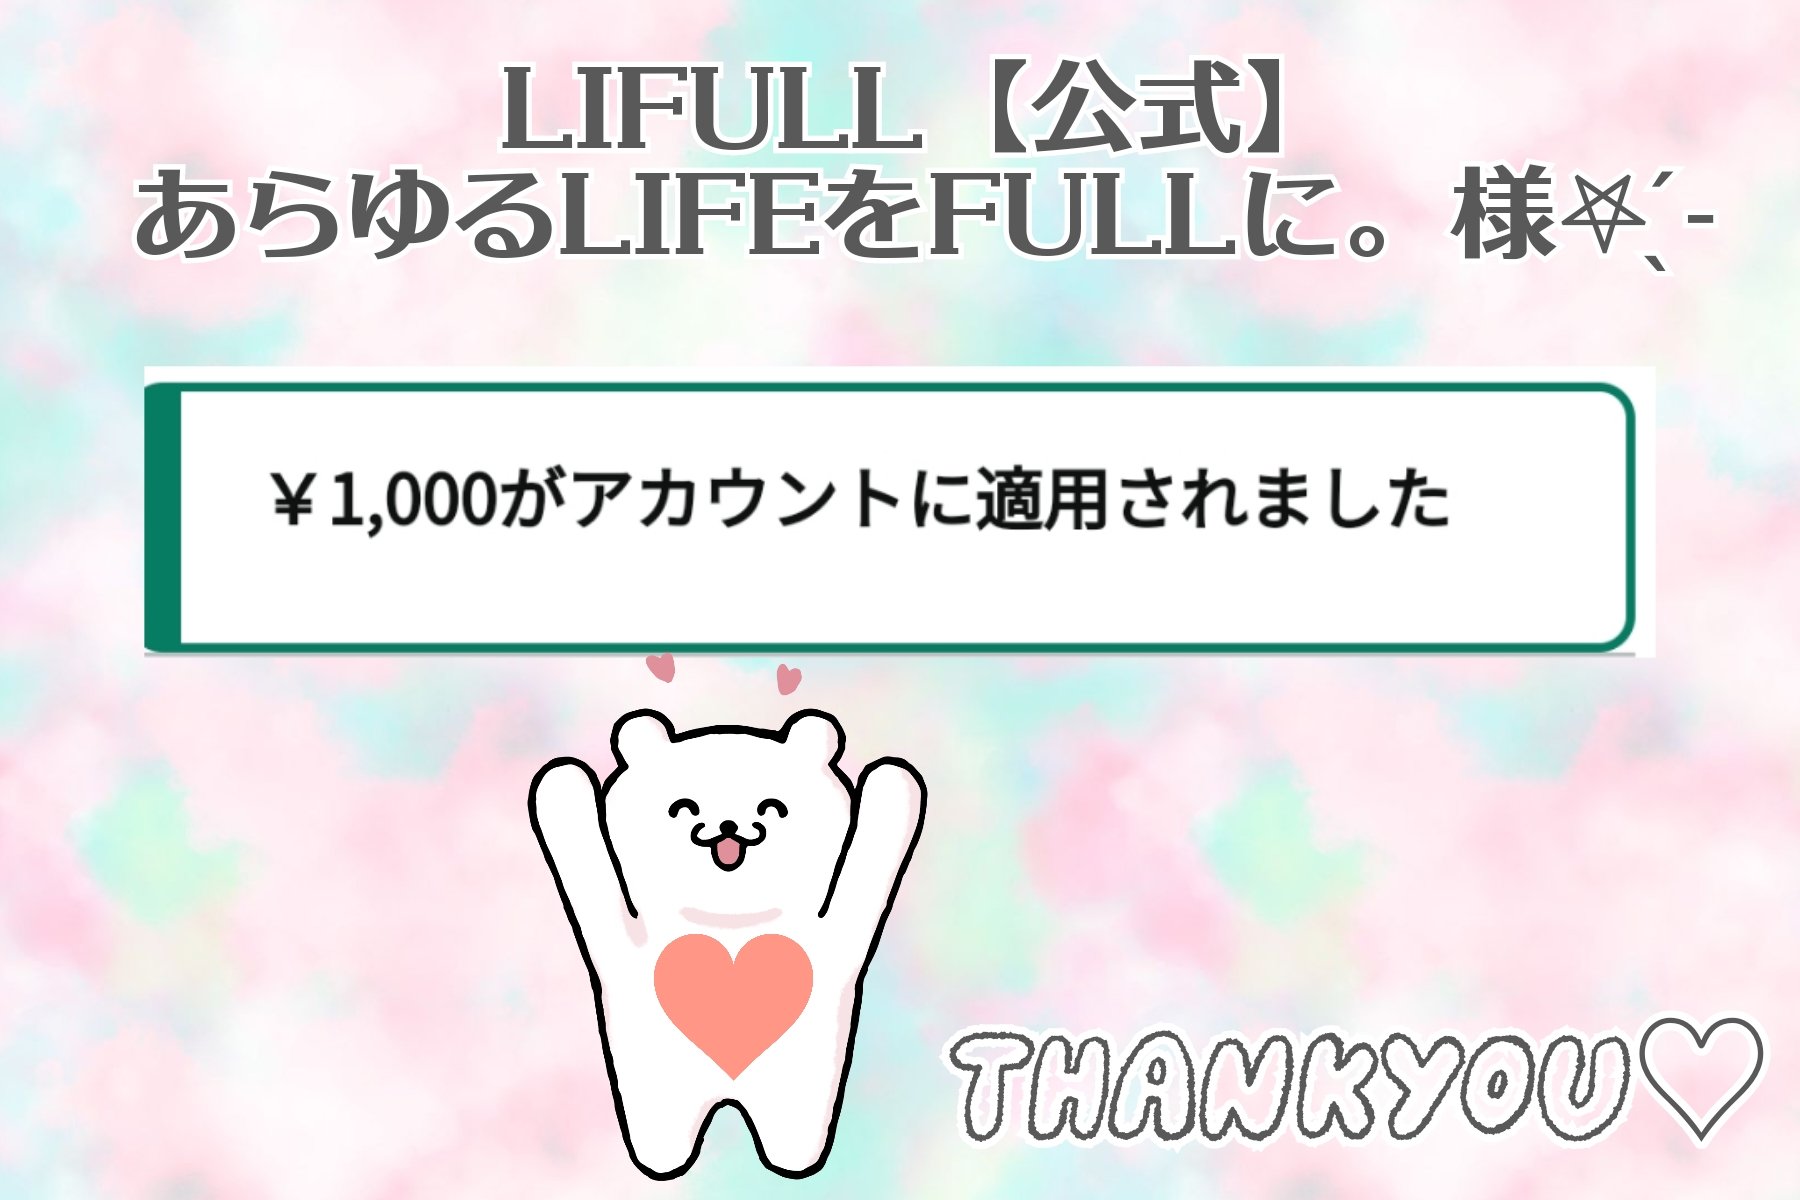 ''☛Thank you ☚″